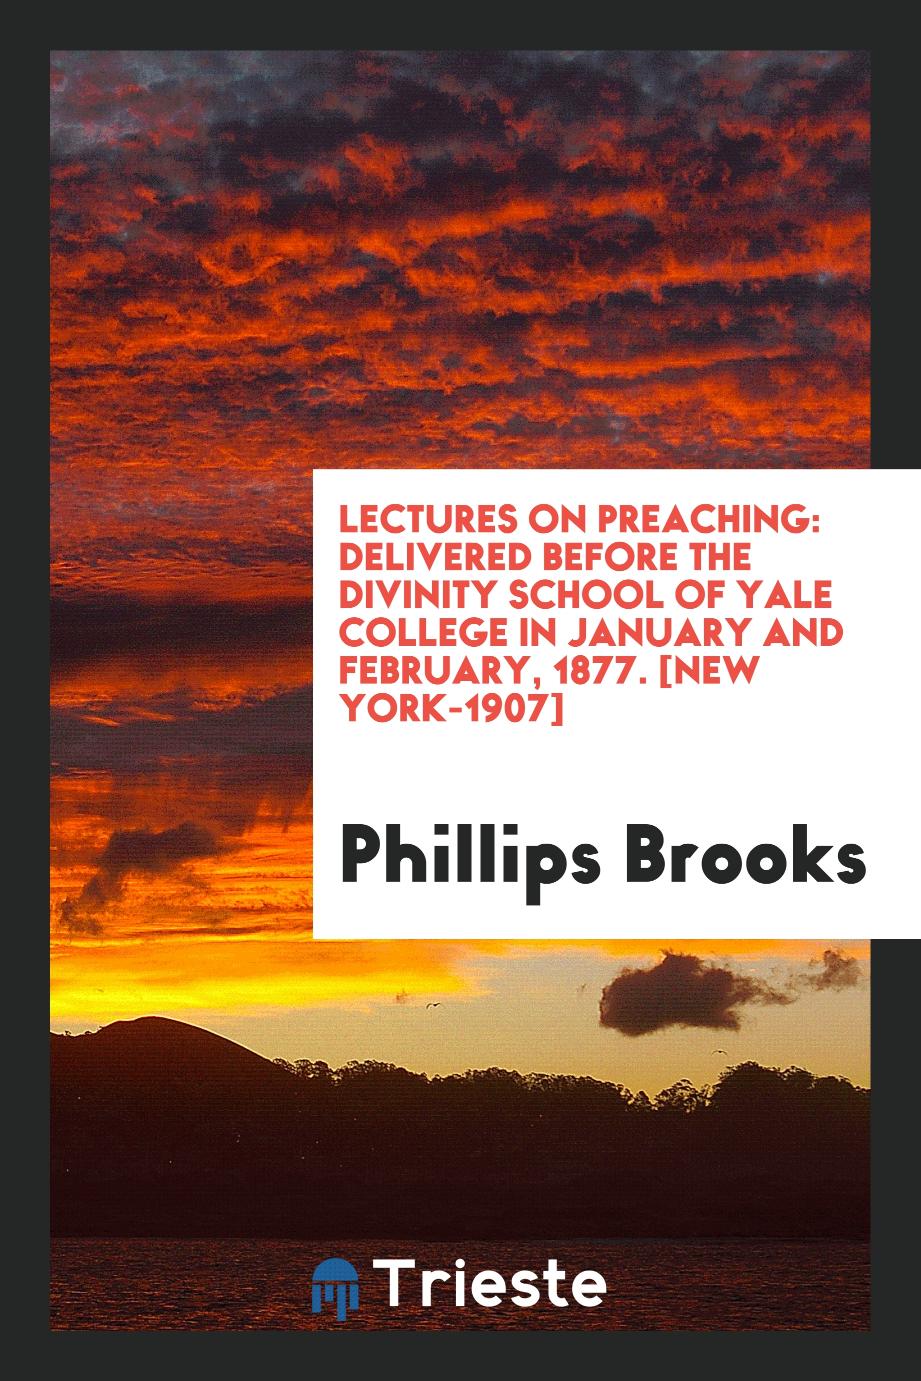 Phillips Brooks - Lectures on Preaching: Delivered Before the Divinity School of Yale College in January and February, 1877. [New York-1907]